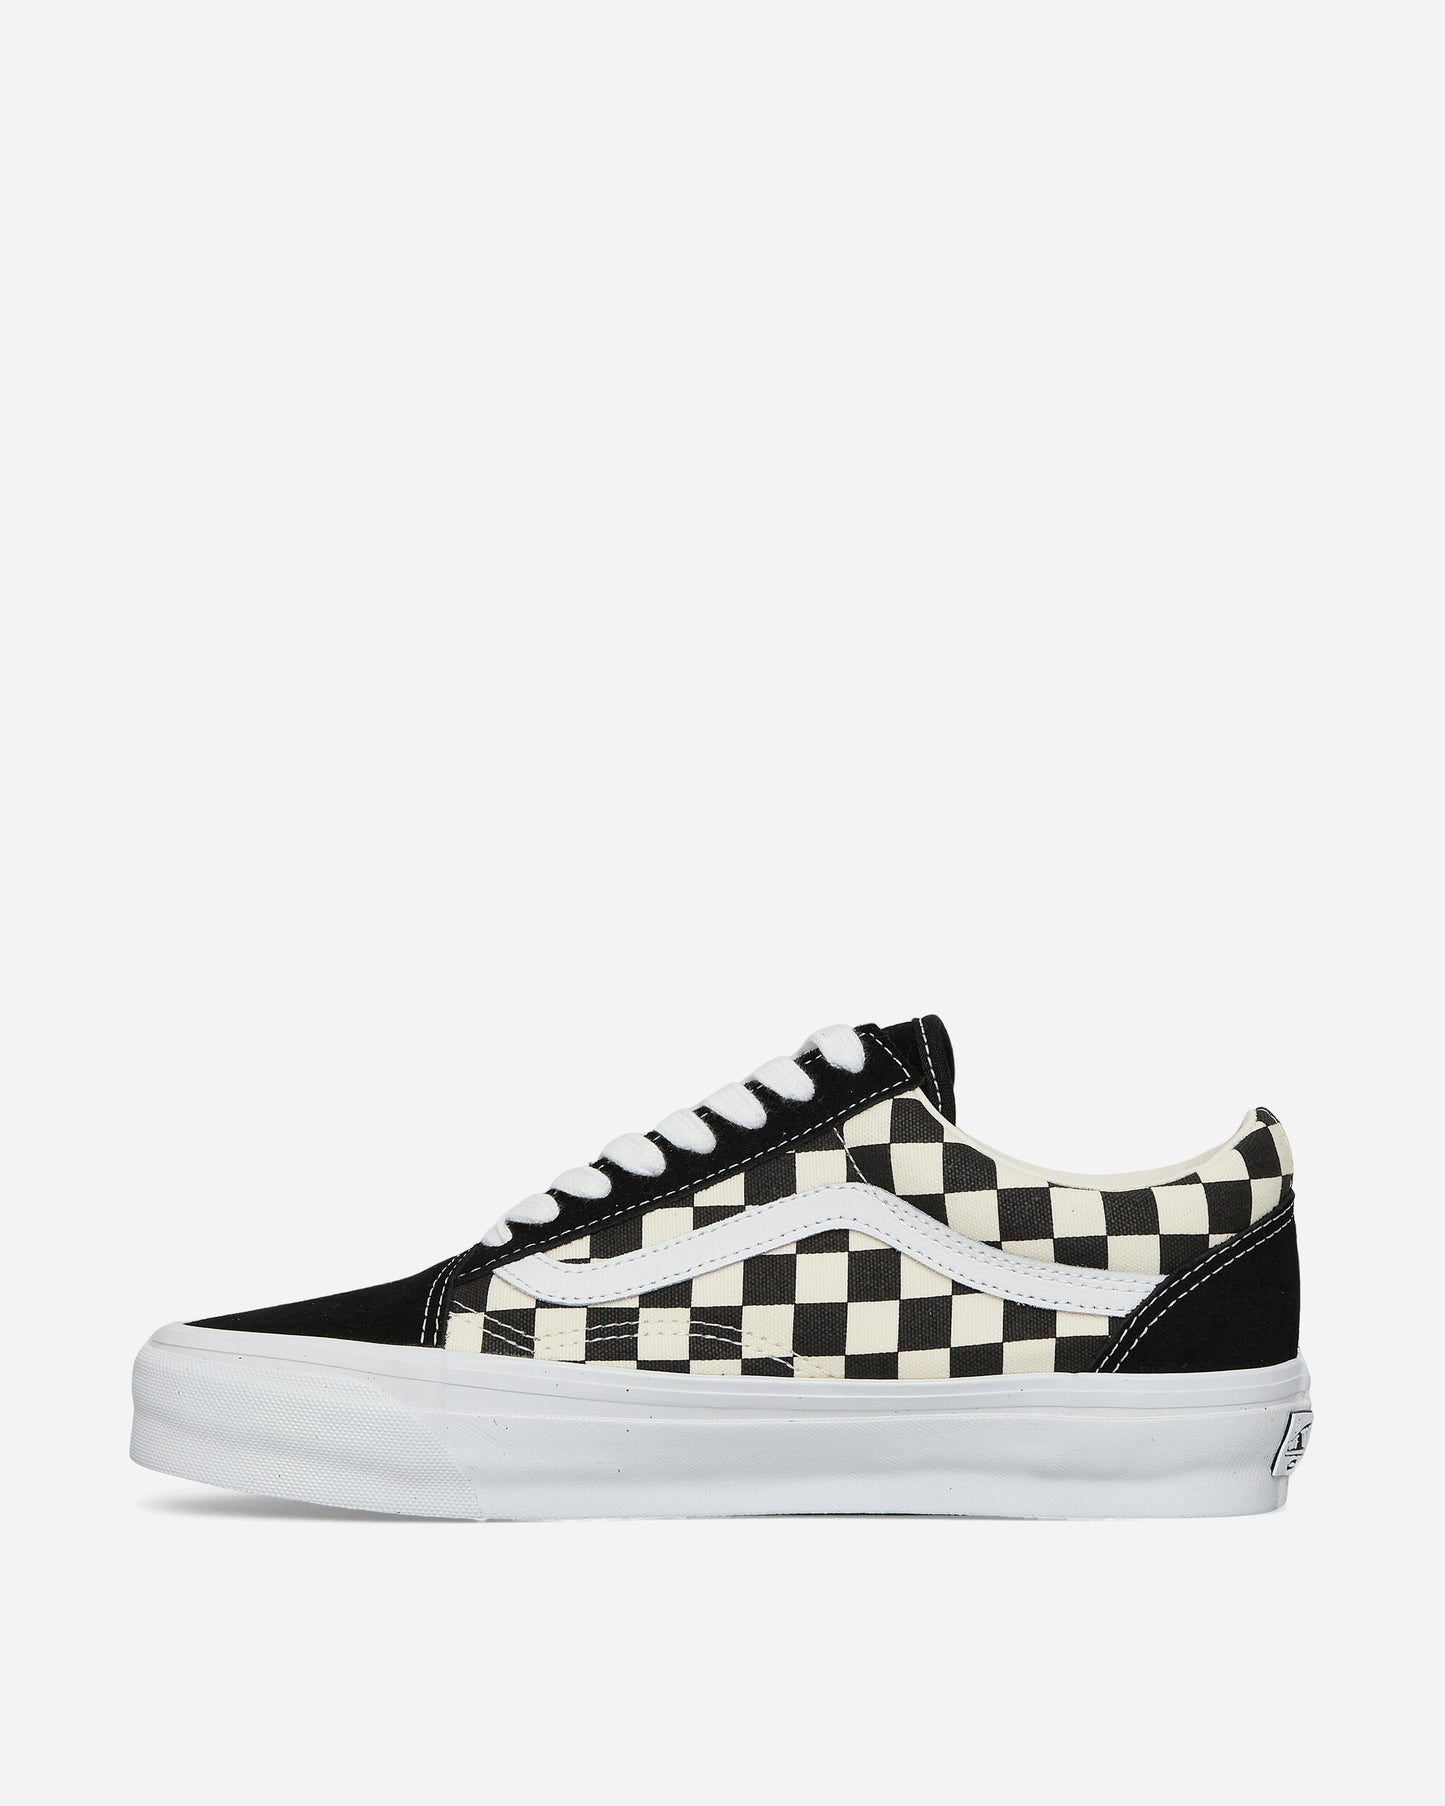 Vans Authentic Reissue 44 Checkerboard Black/Off White Sneakers Low VN000CQD2BO1